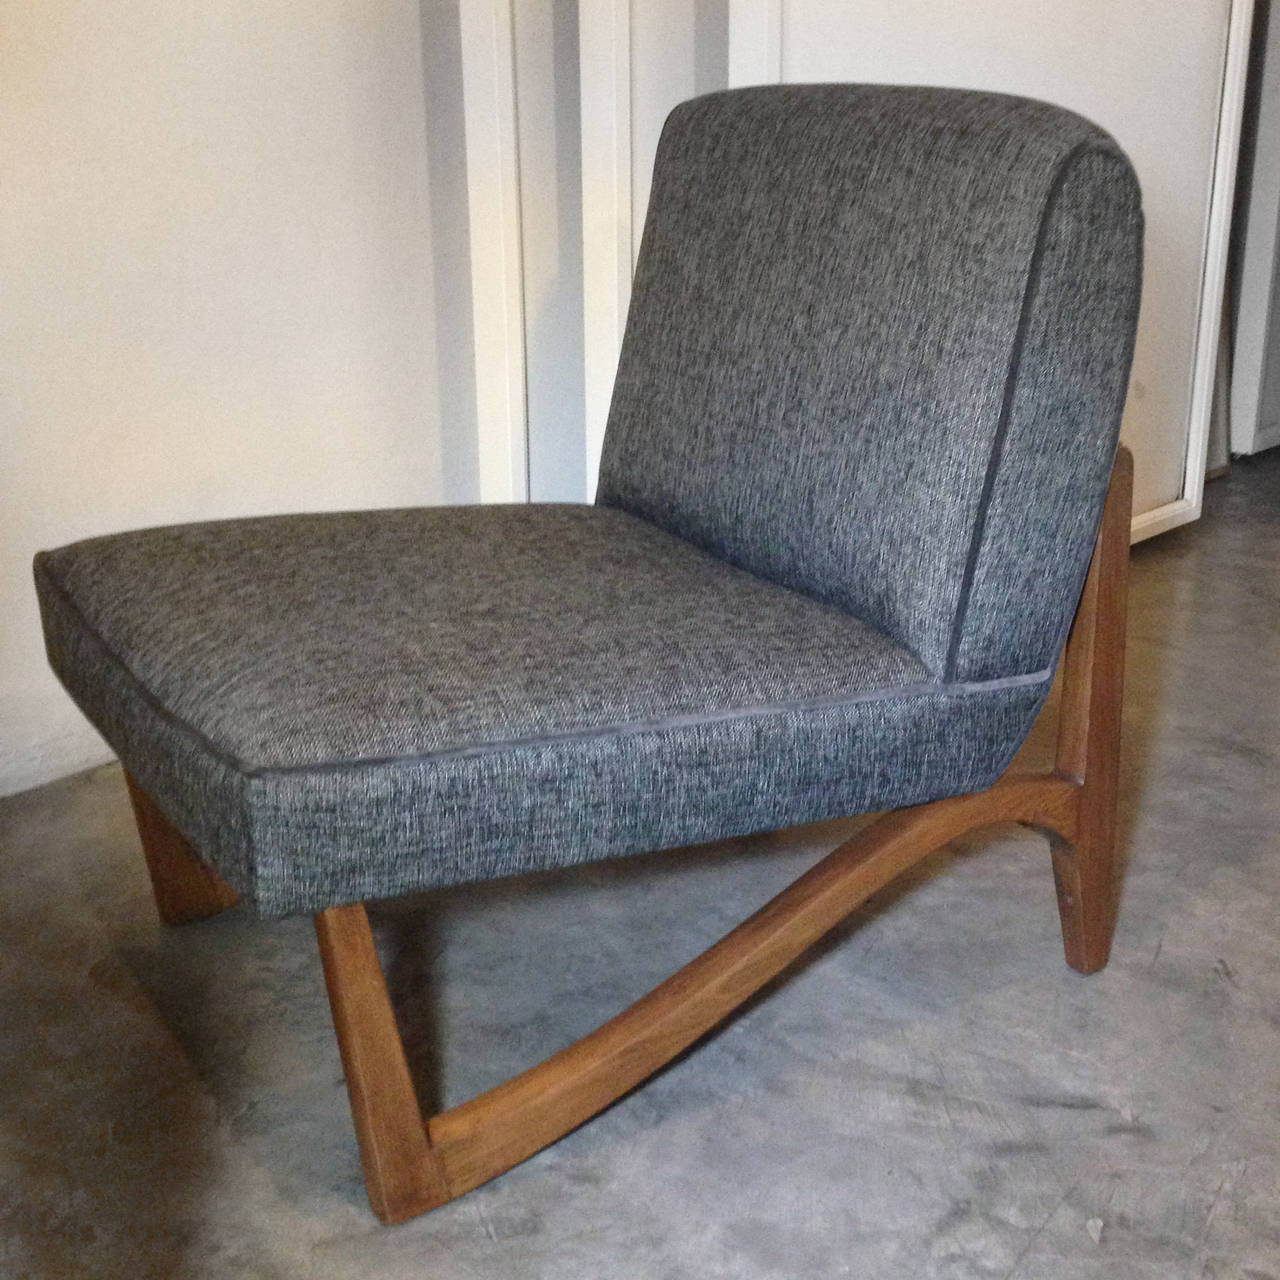 Pair of Midcentury club chairs made on mahogany and gray fabric.